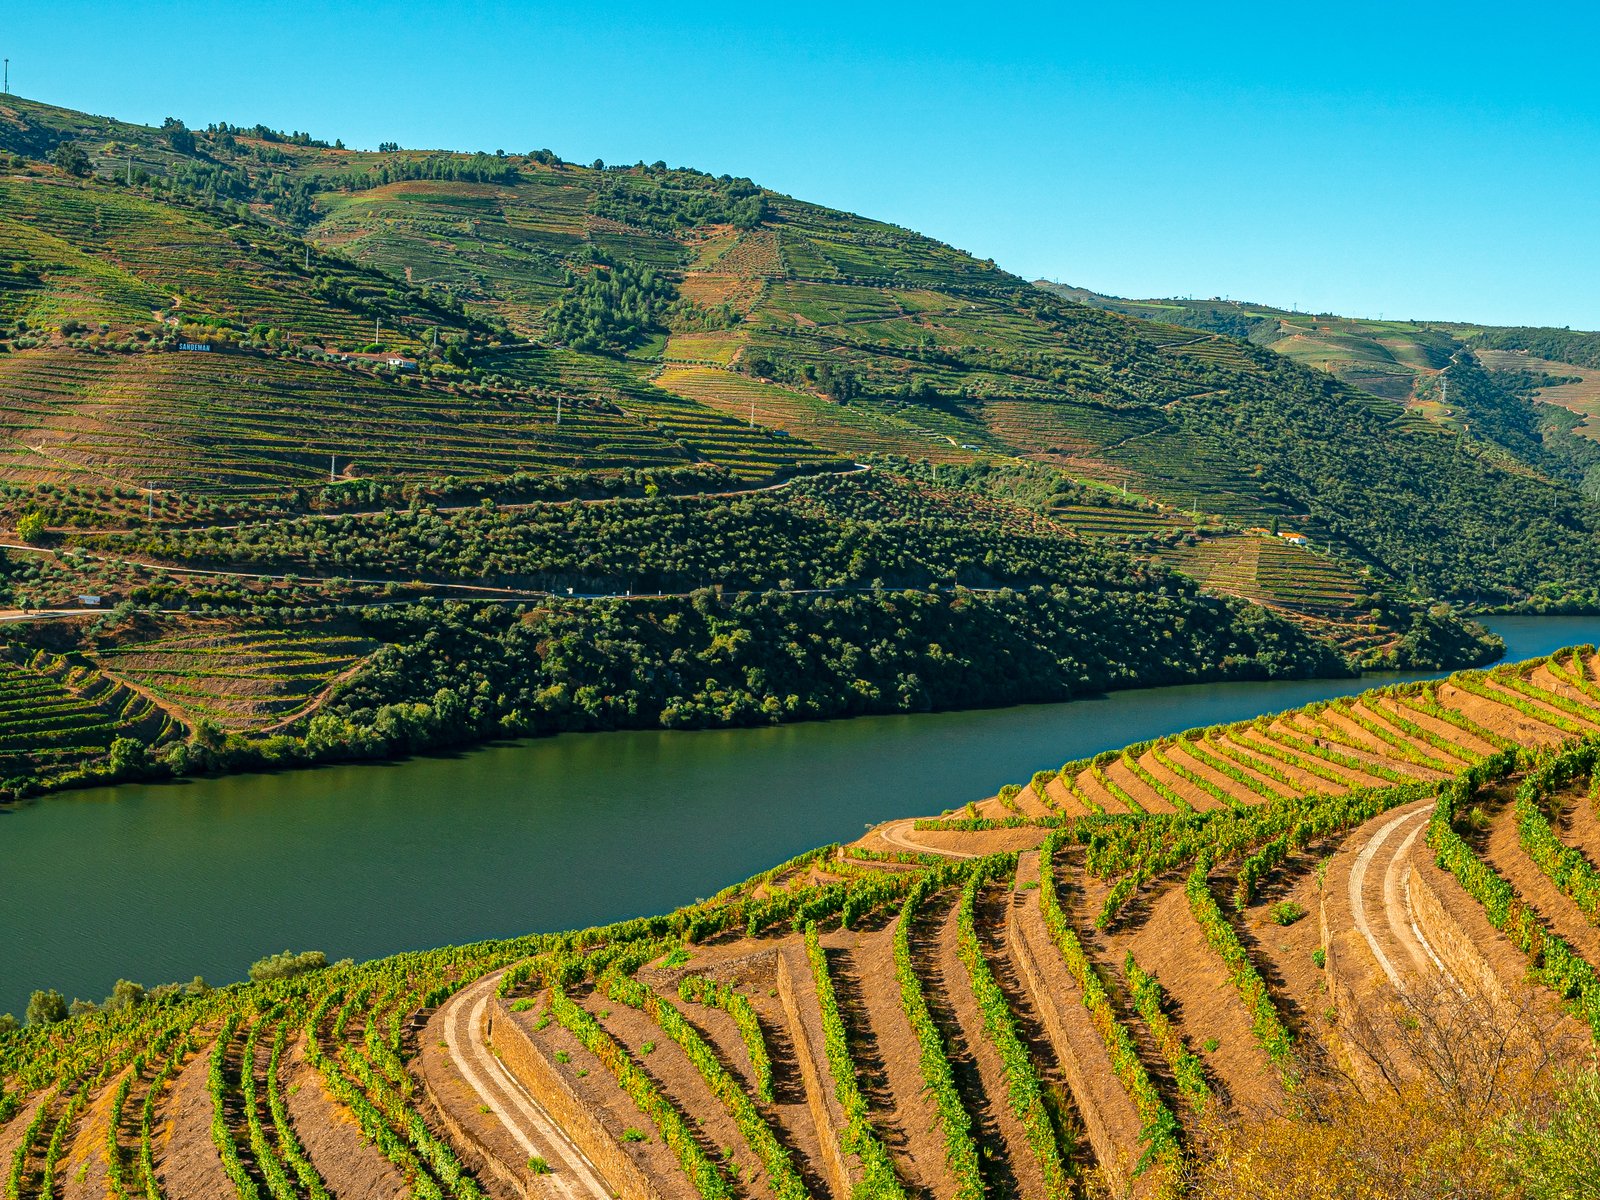 Viosinho is a common grape variety in the Douro Valley.&nbsp;